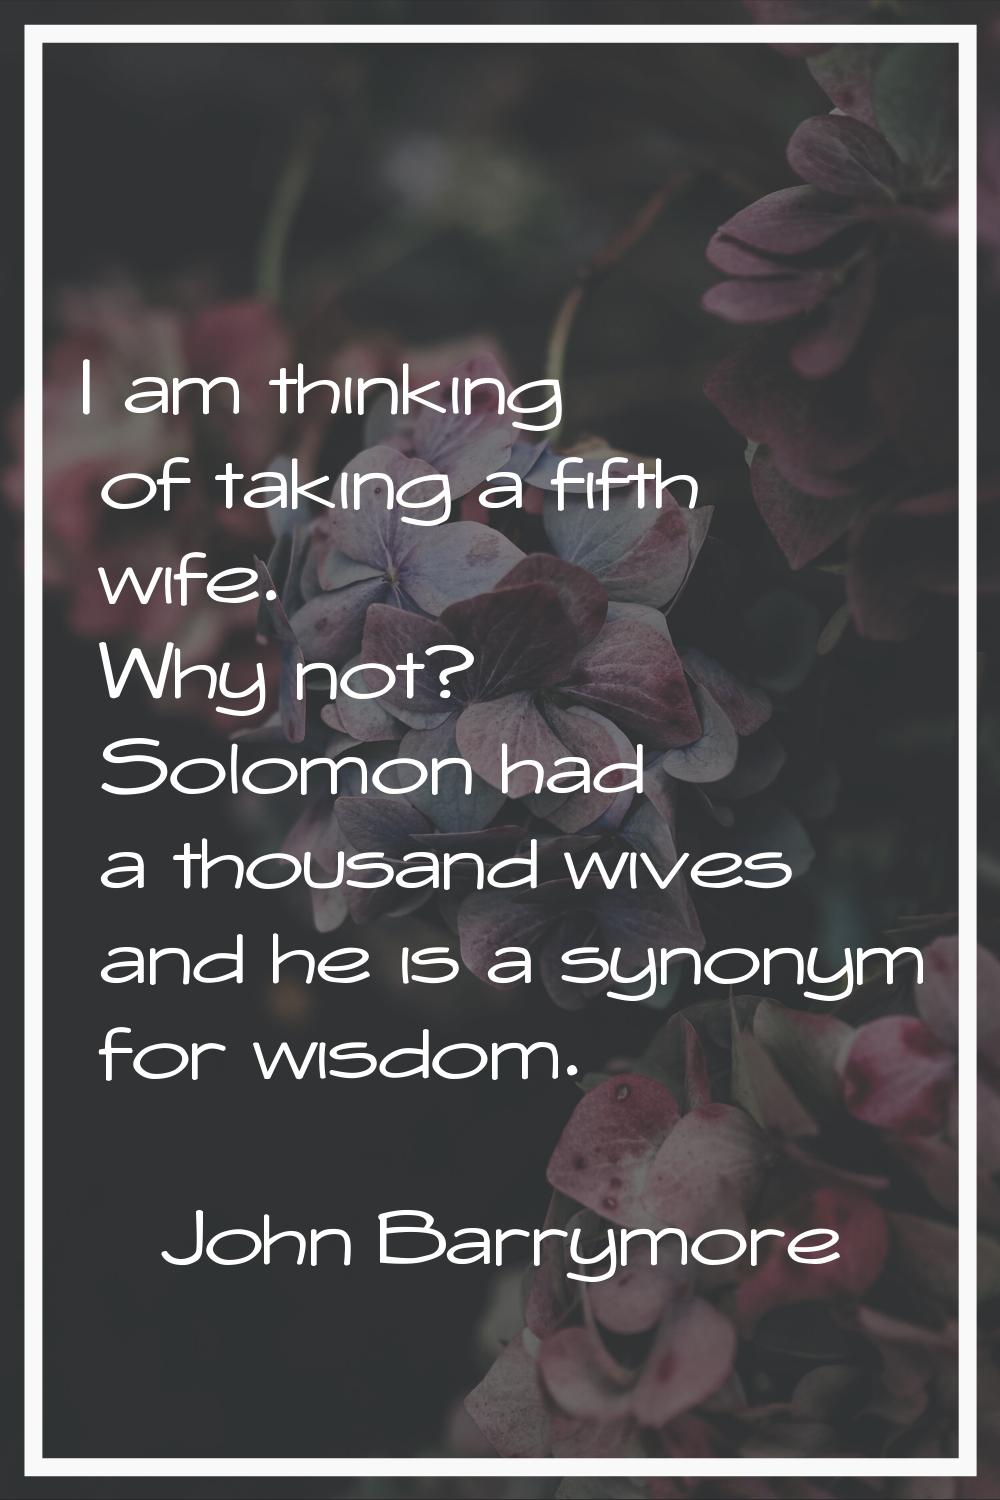 I am thinking of taking a fifth wife. Why not? Solomon had a thousand wives and he is a synonym for